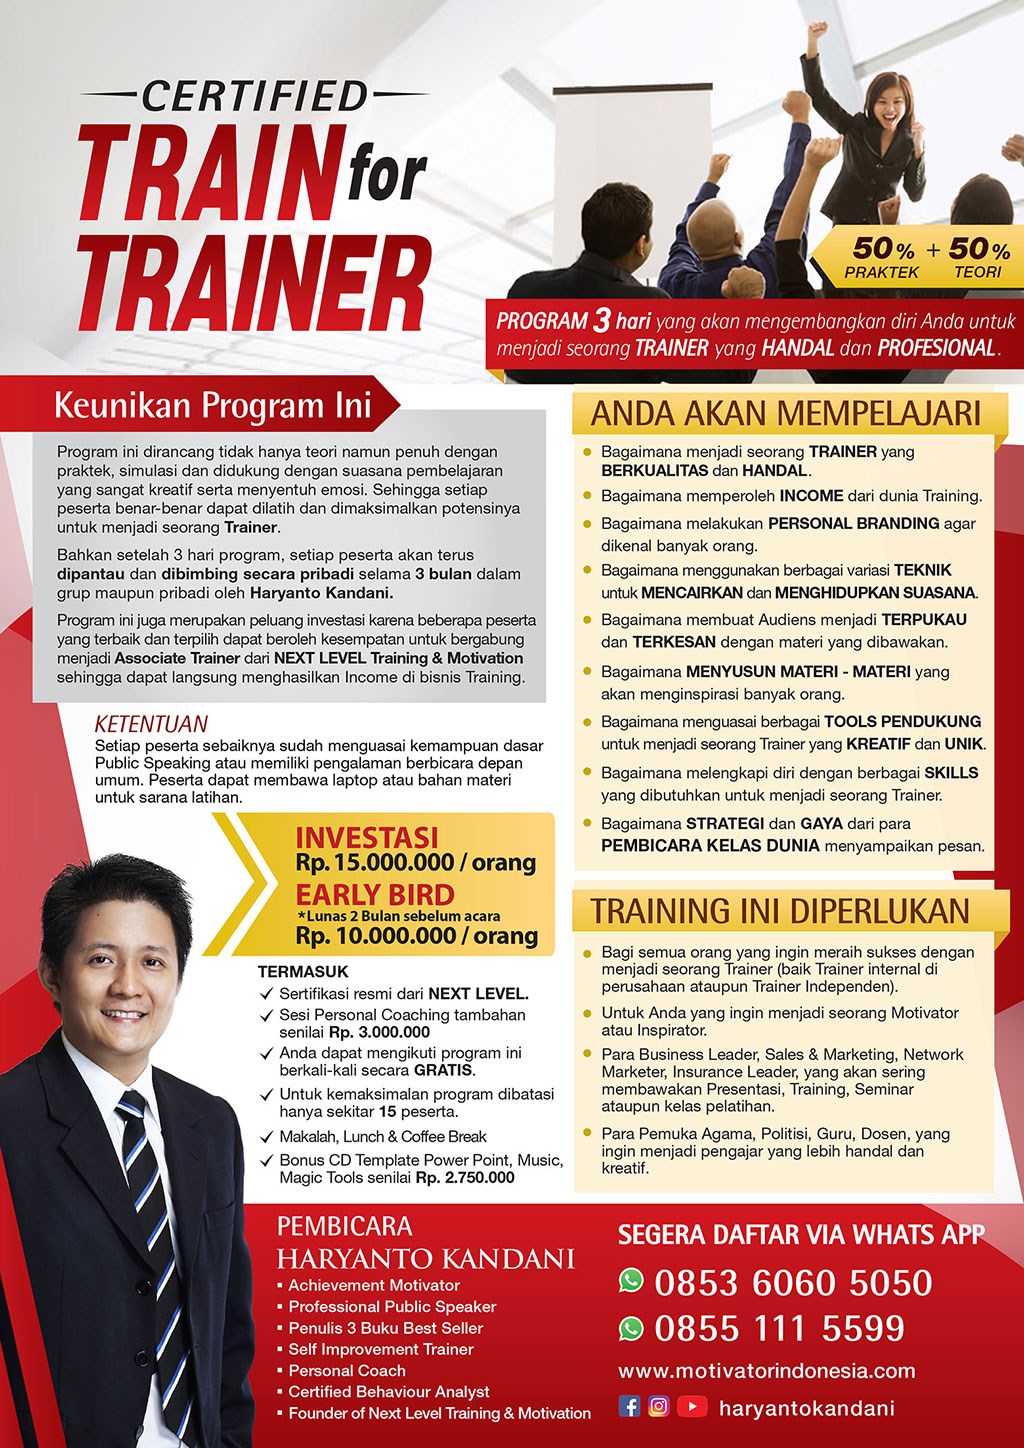 CERTIFIED TRAIN FOR TRAINER